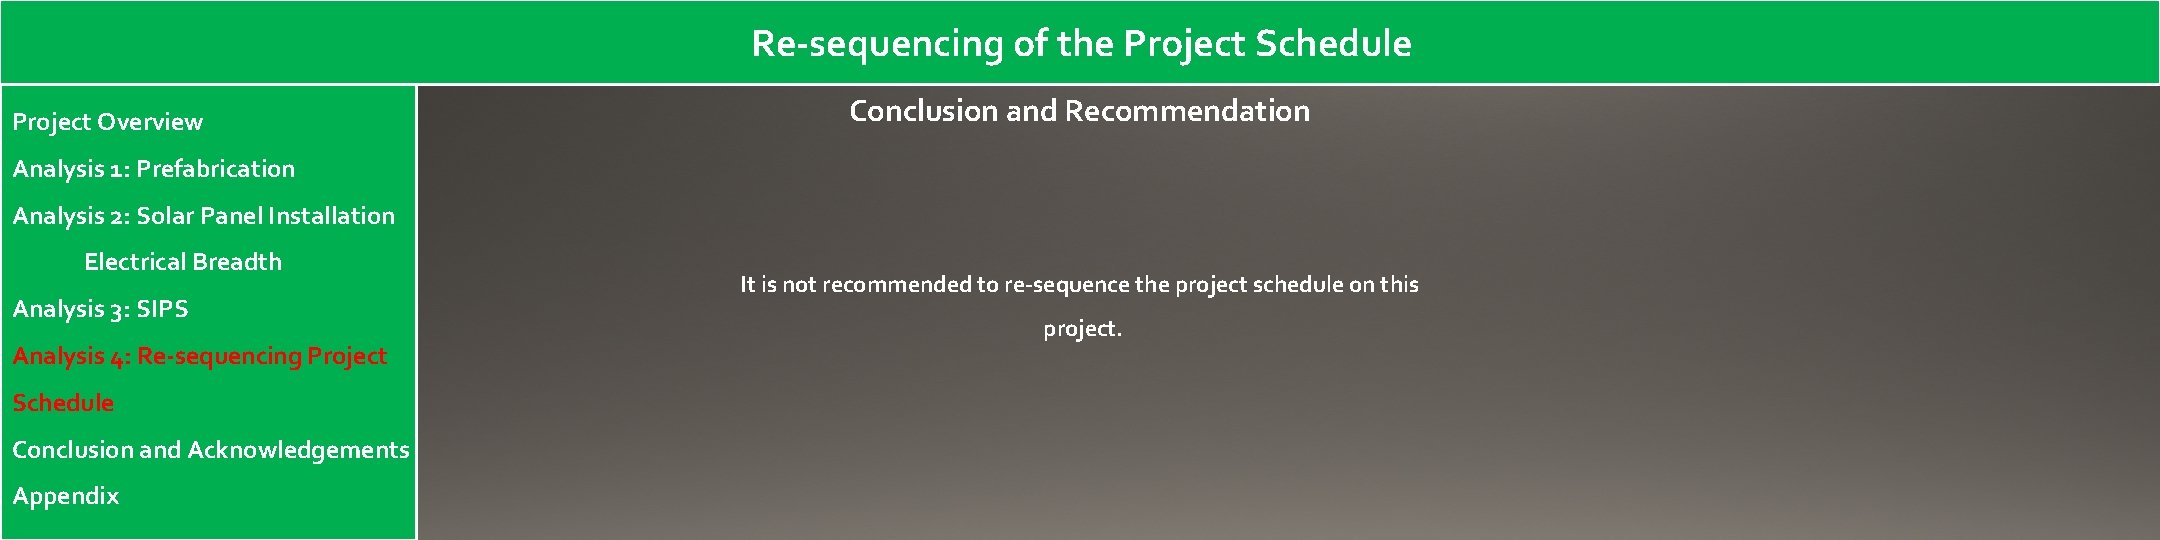 Re-sequencing of the Project Schedule Project Overview Conclusion and Recommendation Analysis 1: Prefabrication Analysis